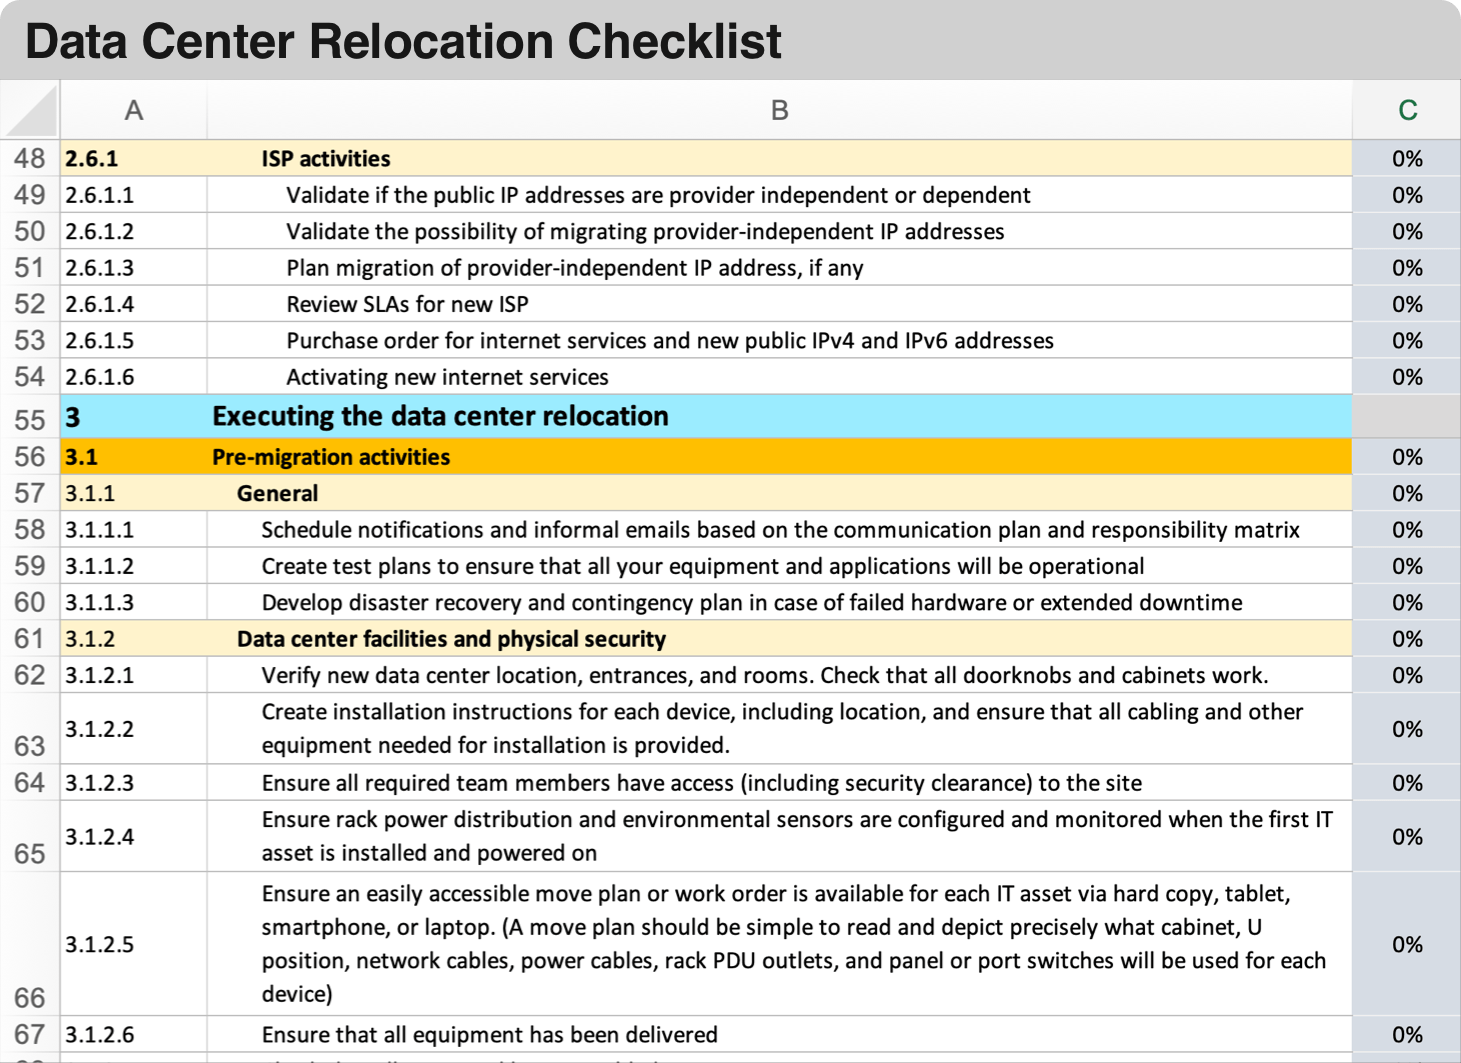 The Data Center Relocation Checklist covers the steps of a complete data center move, including networking, hardware, security and other aspects.